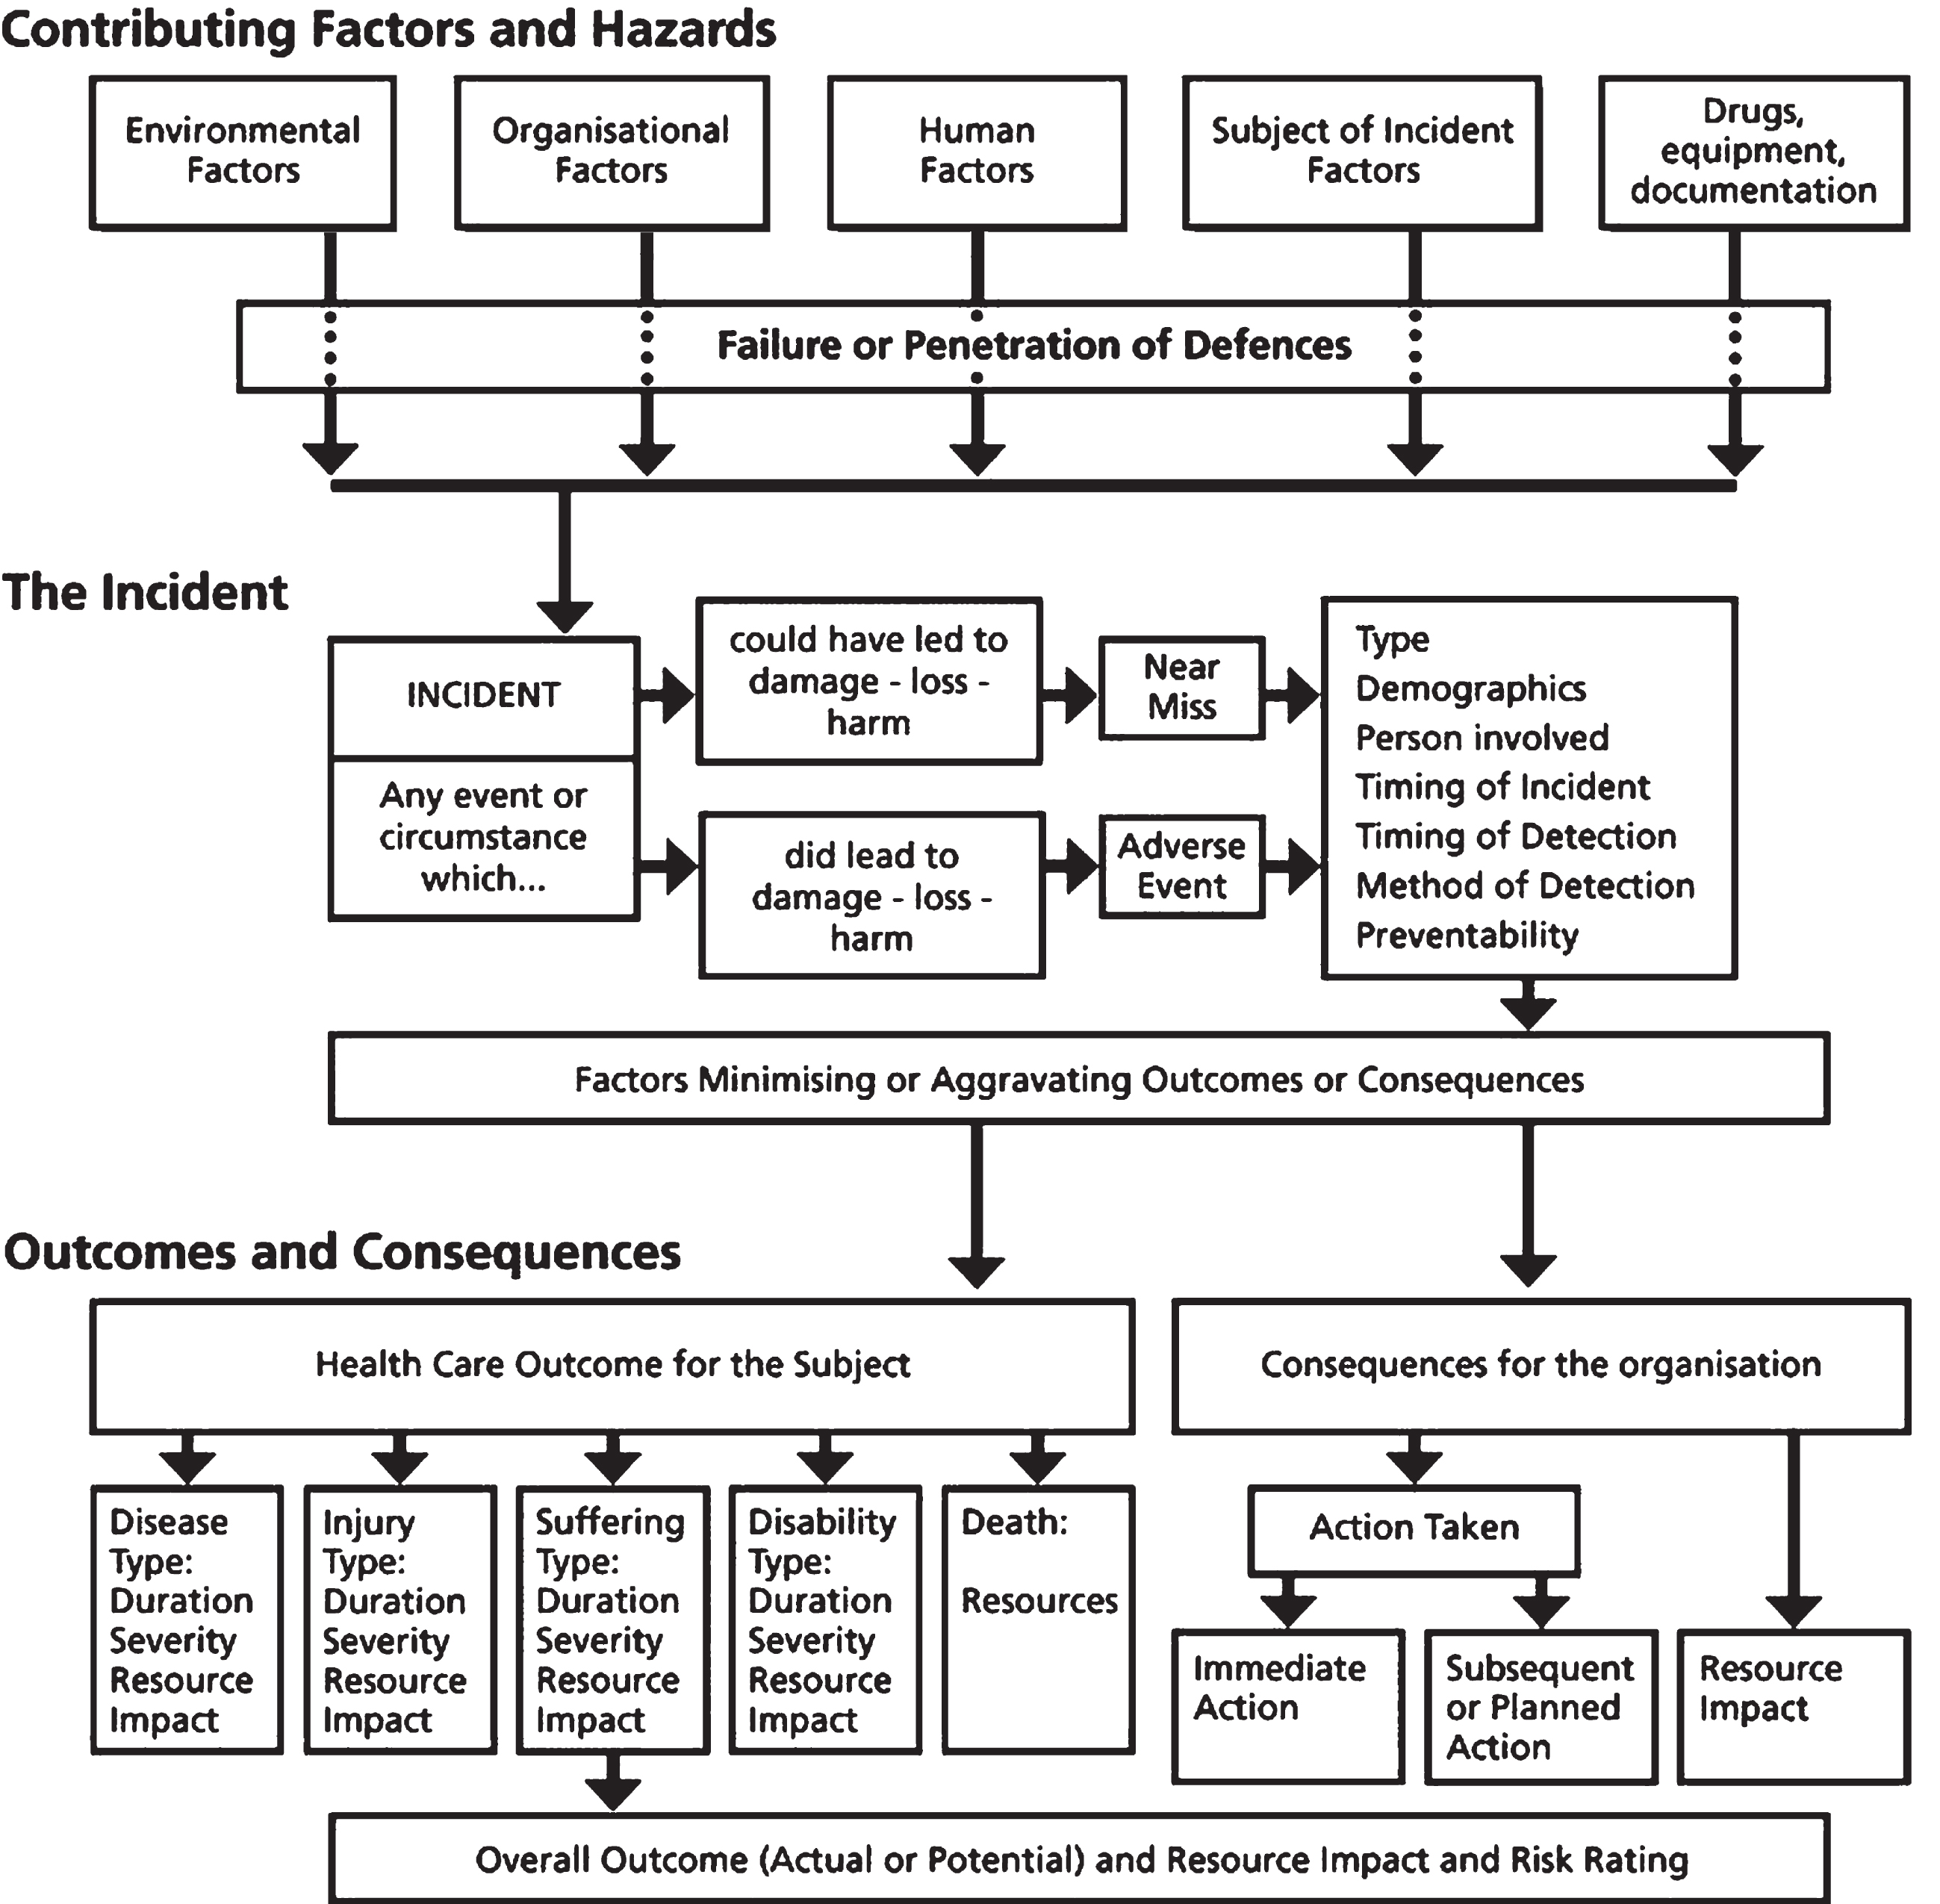 The Generic Reference Model (Runciman et al., 2006). Reproduced from Quality and Safety in Health Care, Runciman.W.B., Williamson, J.A.H., Deakin, A., Benveniste, K.A., Bannon, K., & Hibbert, P.D. volume 15(suppl), i82-i90, copyright 2006 with permission from BMJ Publishing Group Ltd.